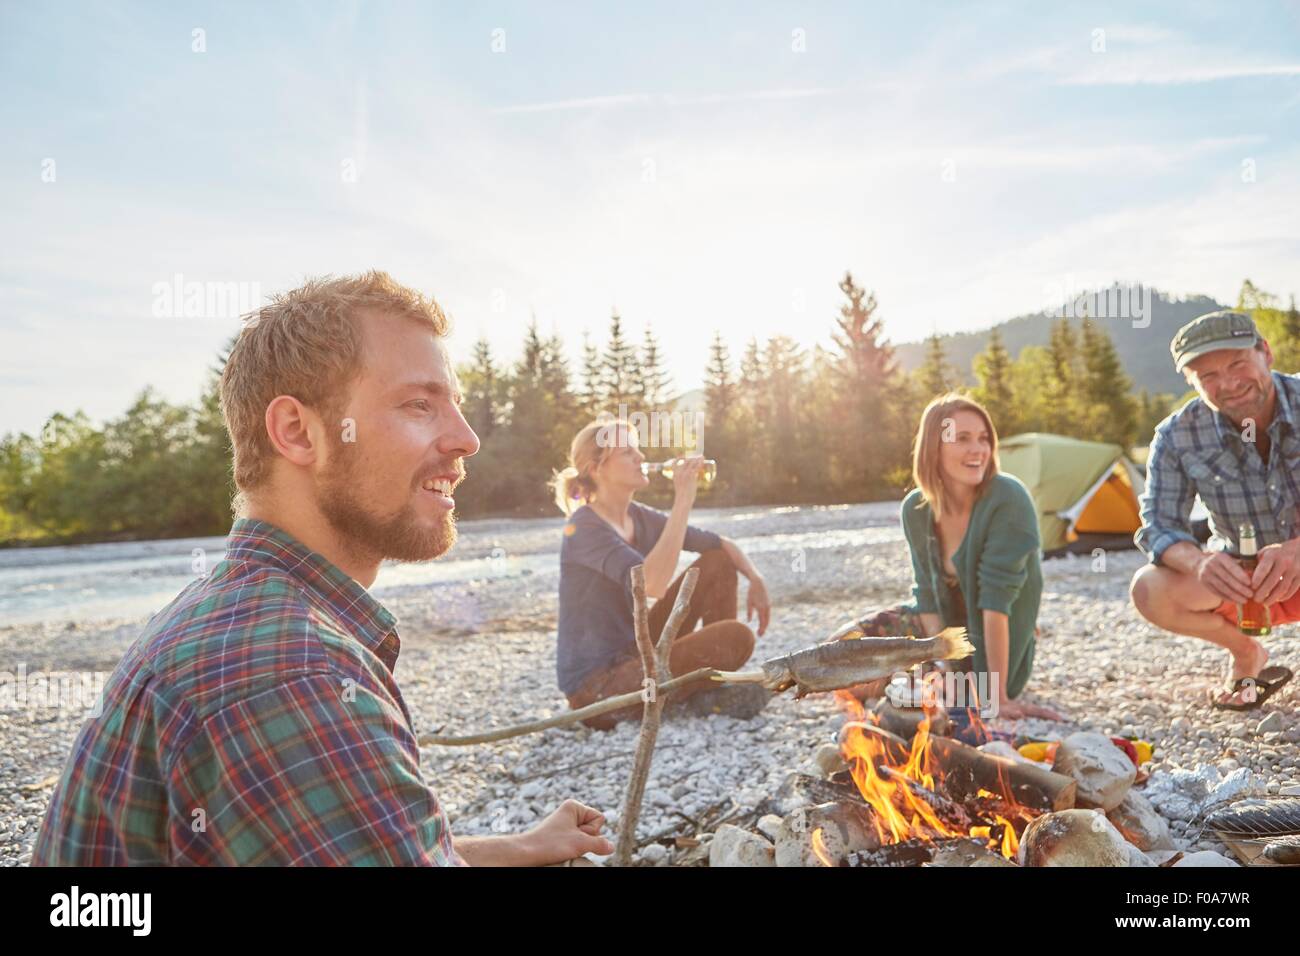 Adults sitting around campfire drinking bottles of beer, smiling Stock Photo